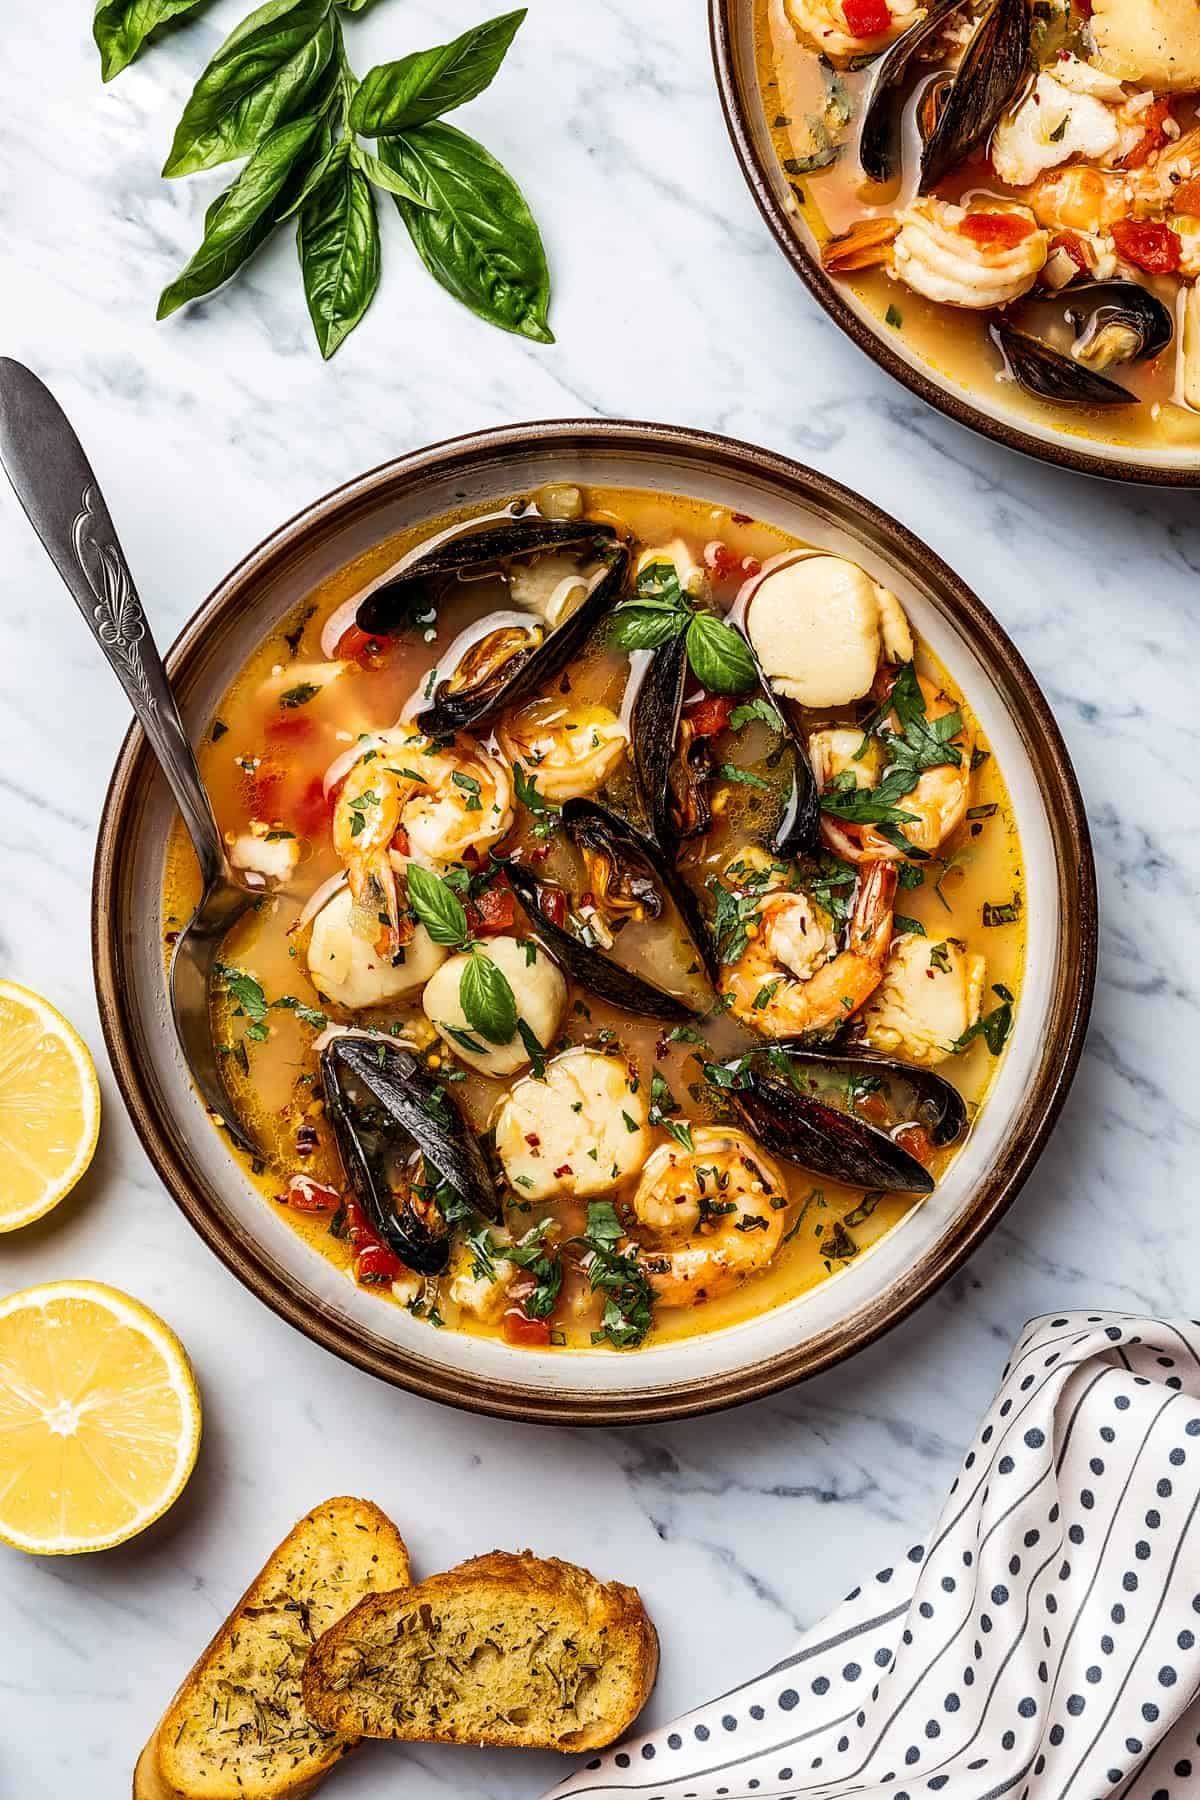 Delicious Bouillabaisse on a plate with a spoon.